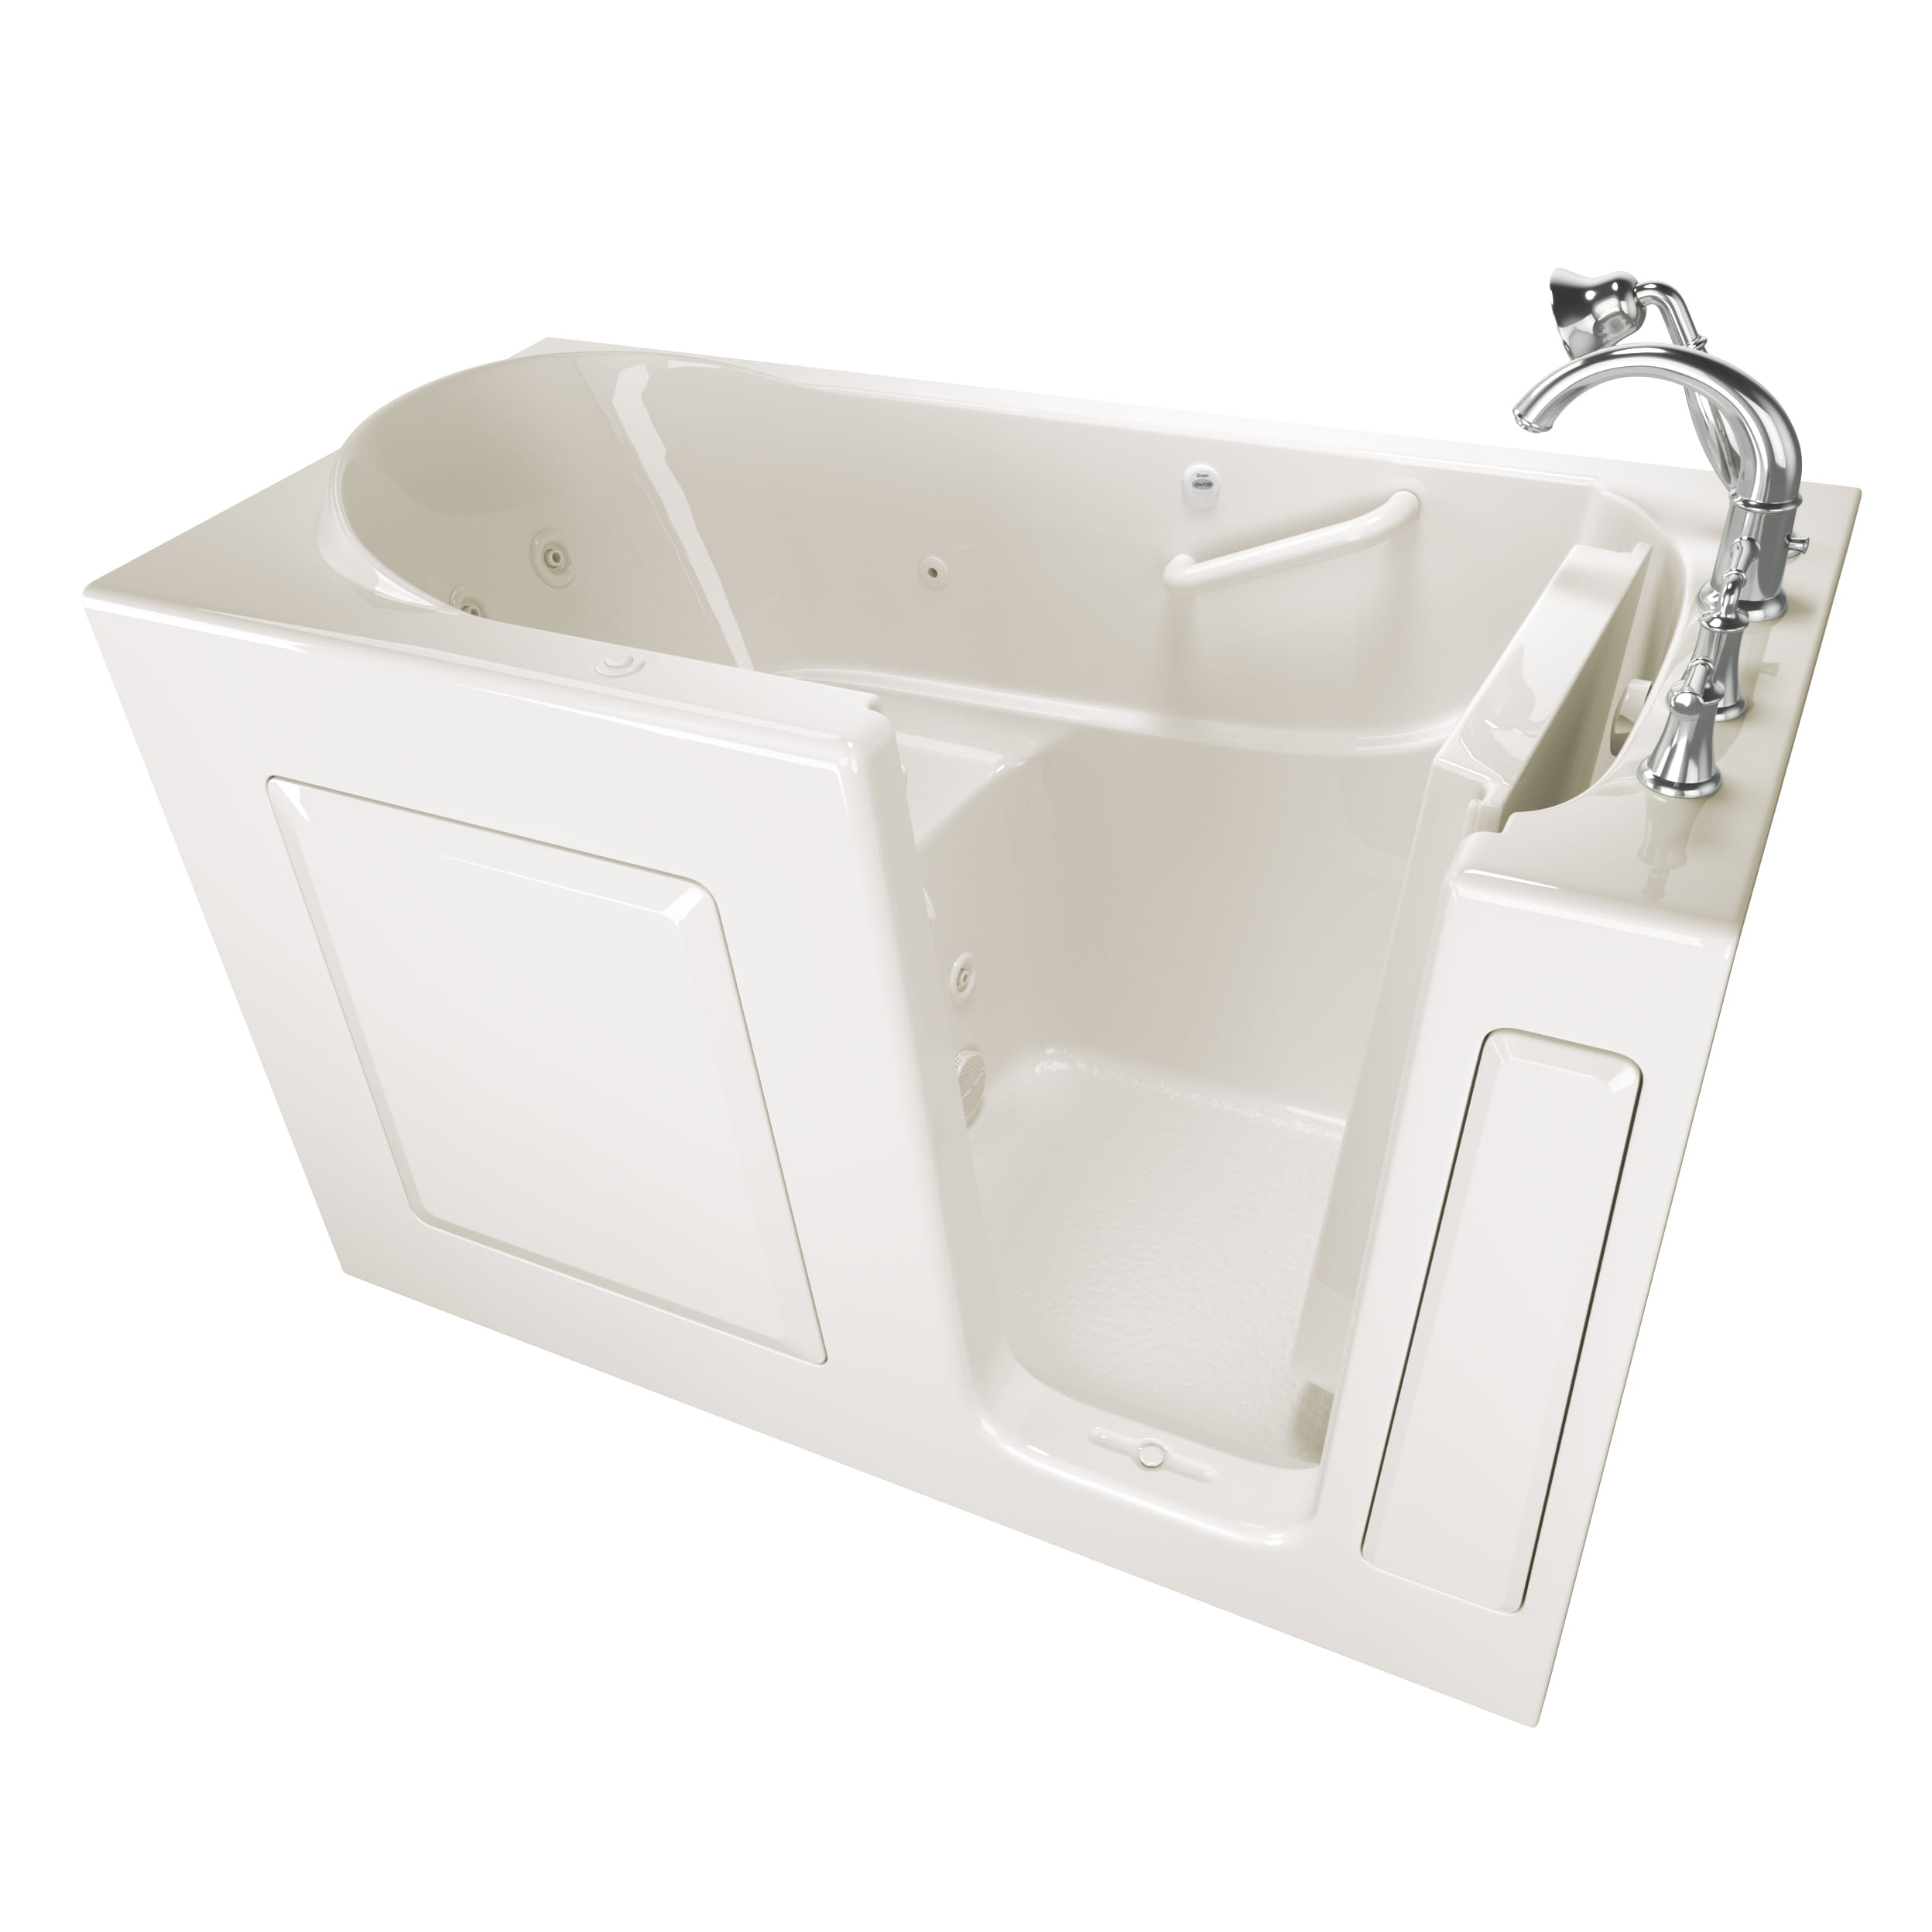 Gelcoat Value Series 30 x 60 -Inch Walk-in Tub With Whirlpool System - Right-Hand Drain With Faucet